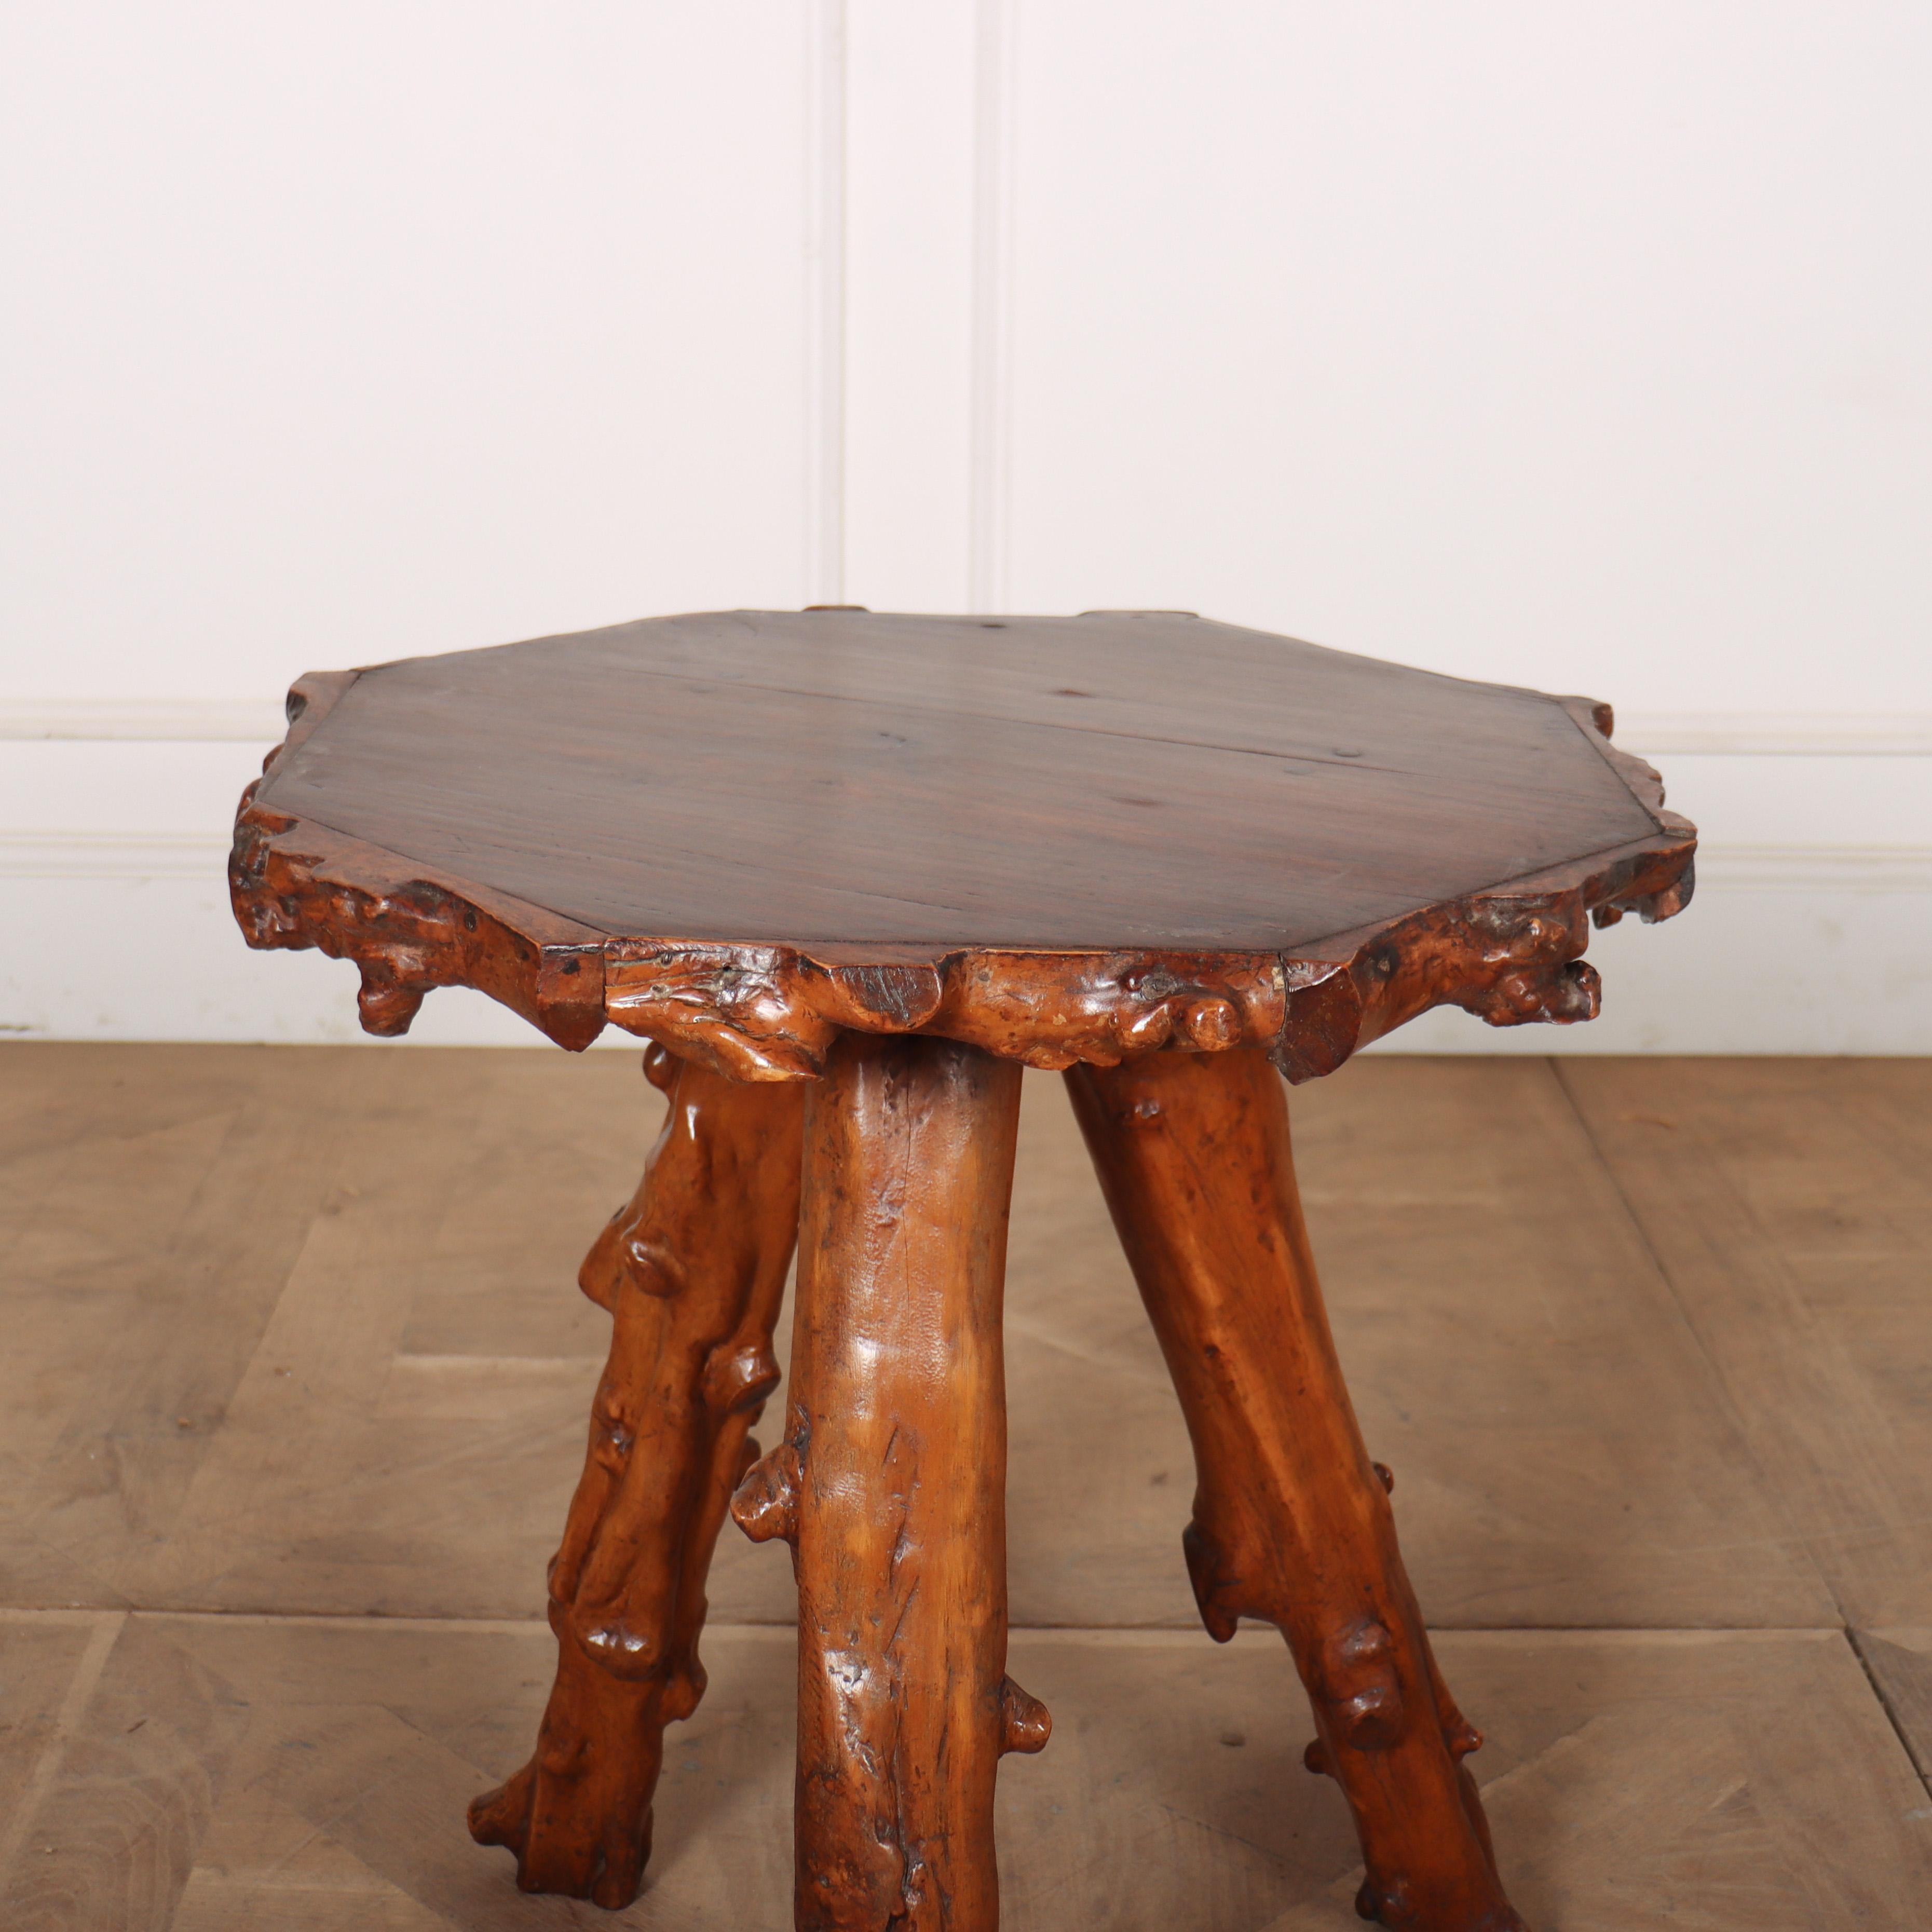 Small primitive Scottish root side table. 1900.

Reference: 8309

Dimensions
23 inches (58 cms) High
21 inches (53 cms) Diameter